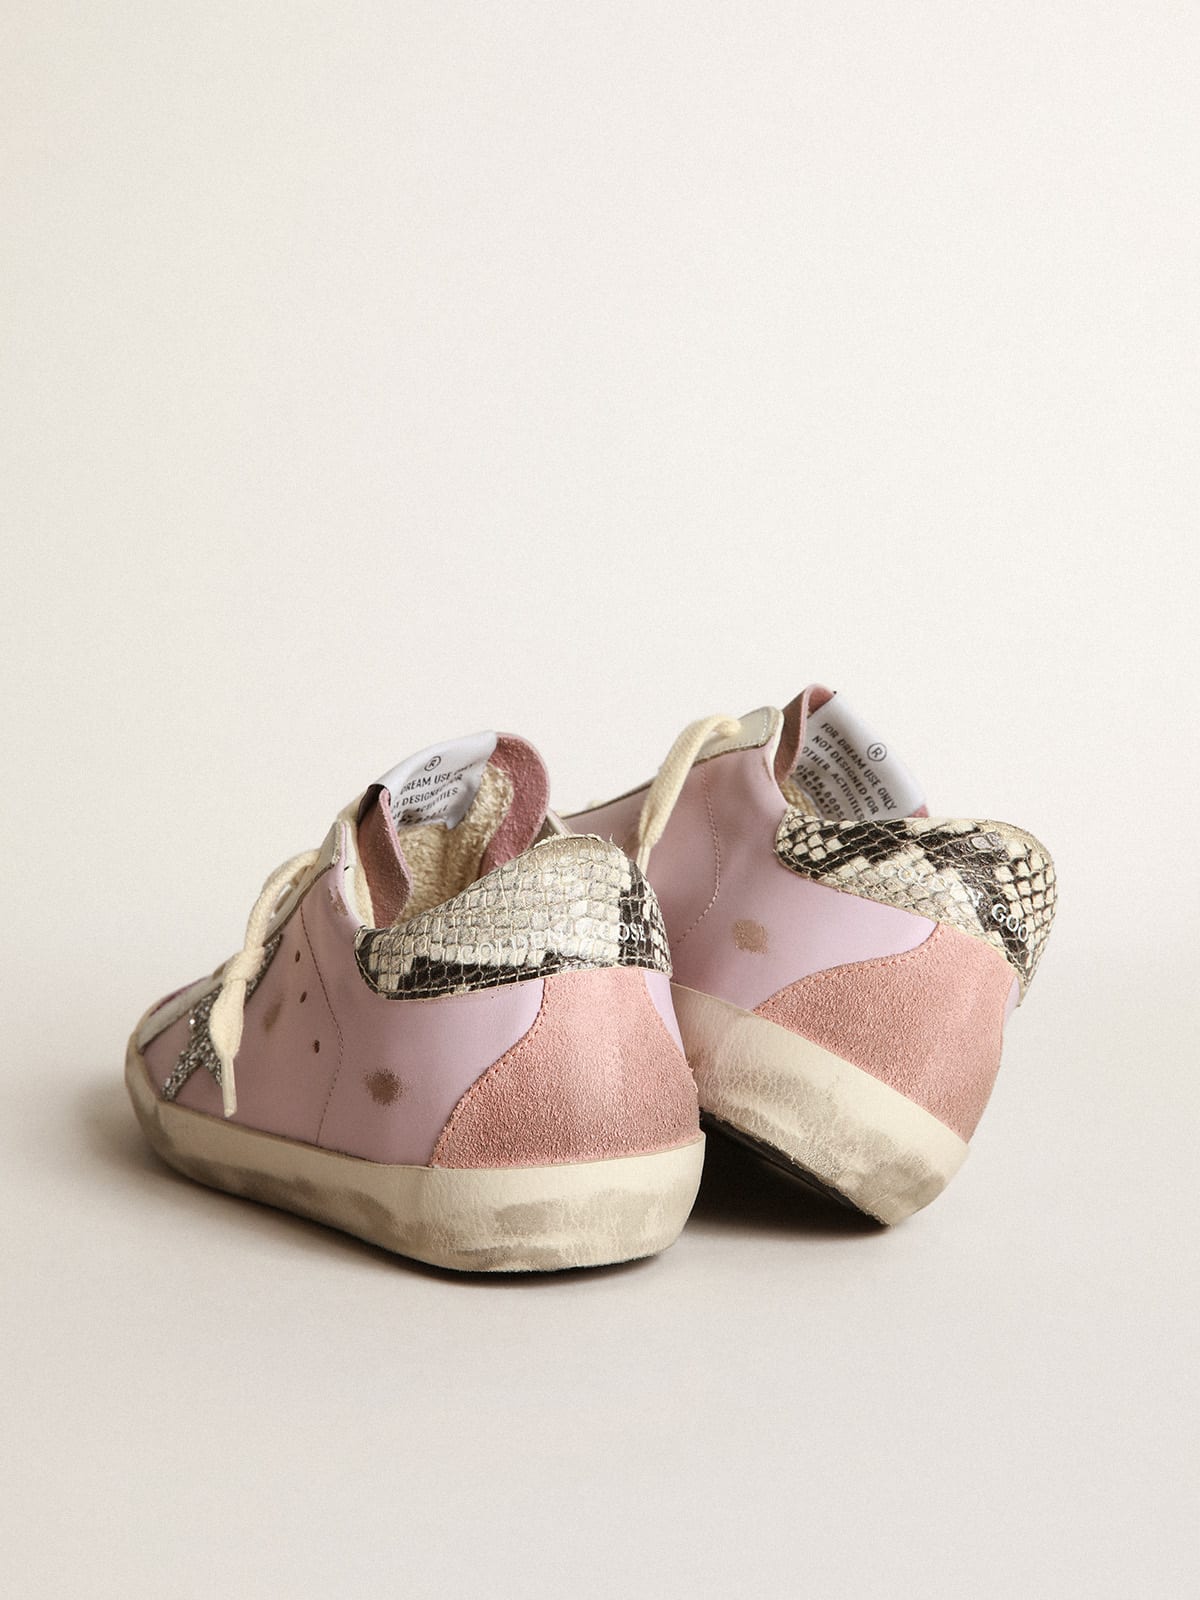 Super-Star sneakers in pink leather with silver glitter star and snake-print  leather heel tab | Golden Goose